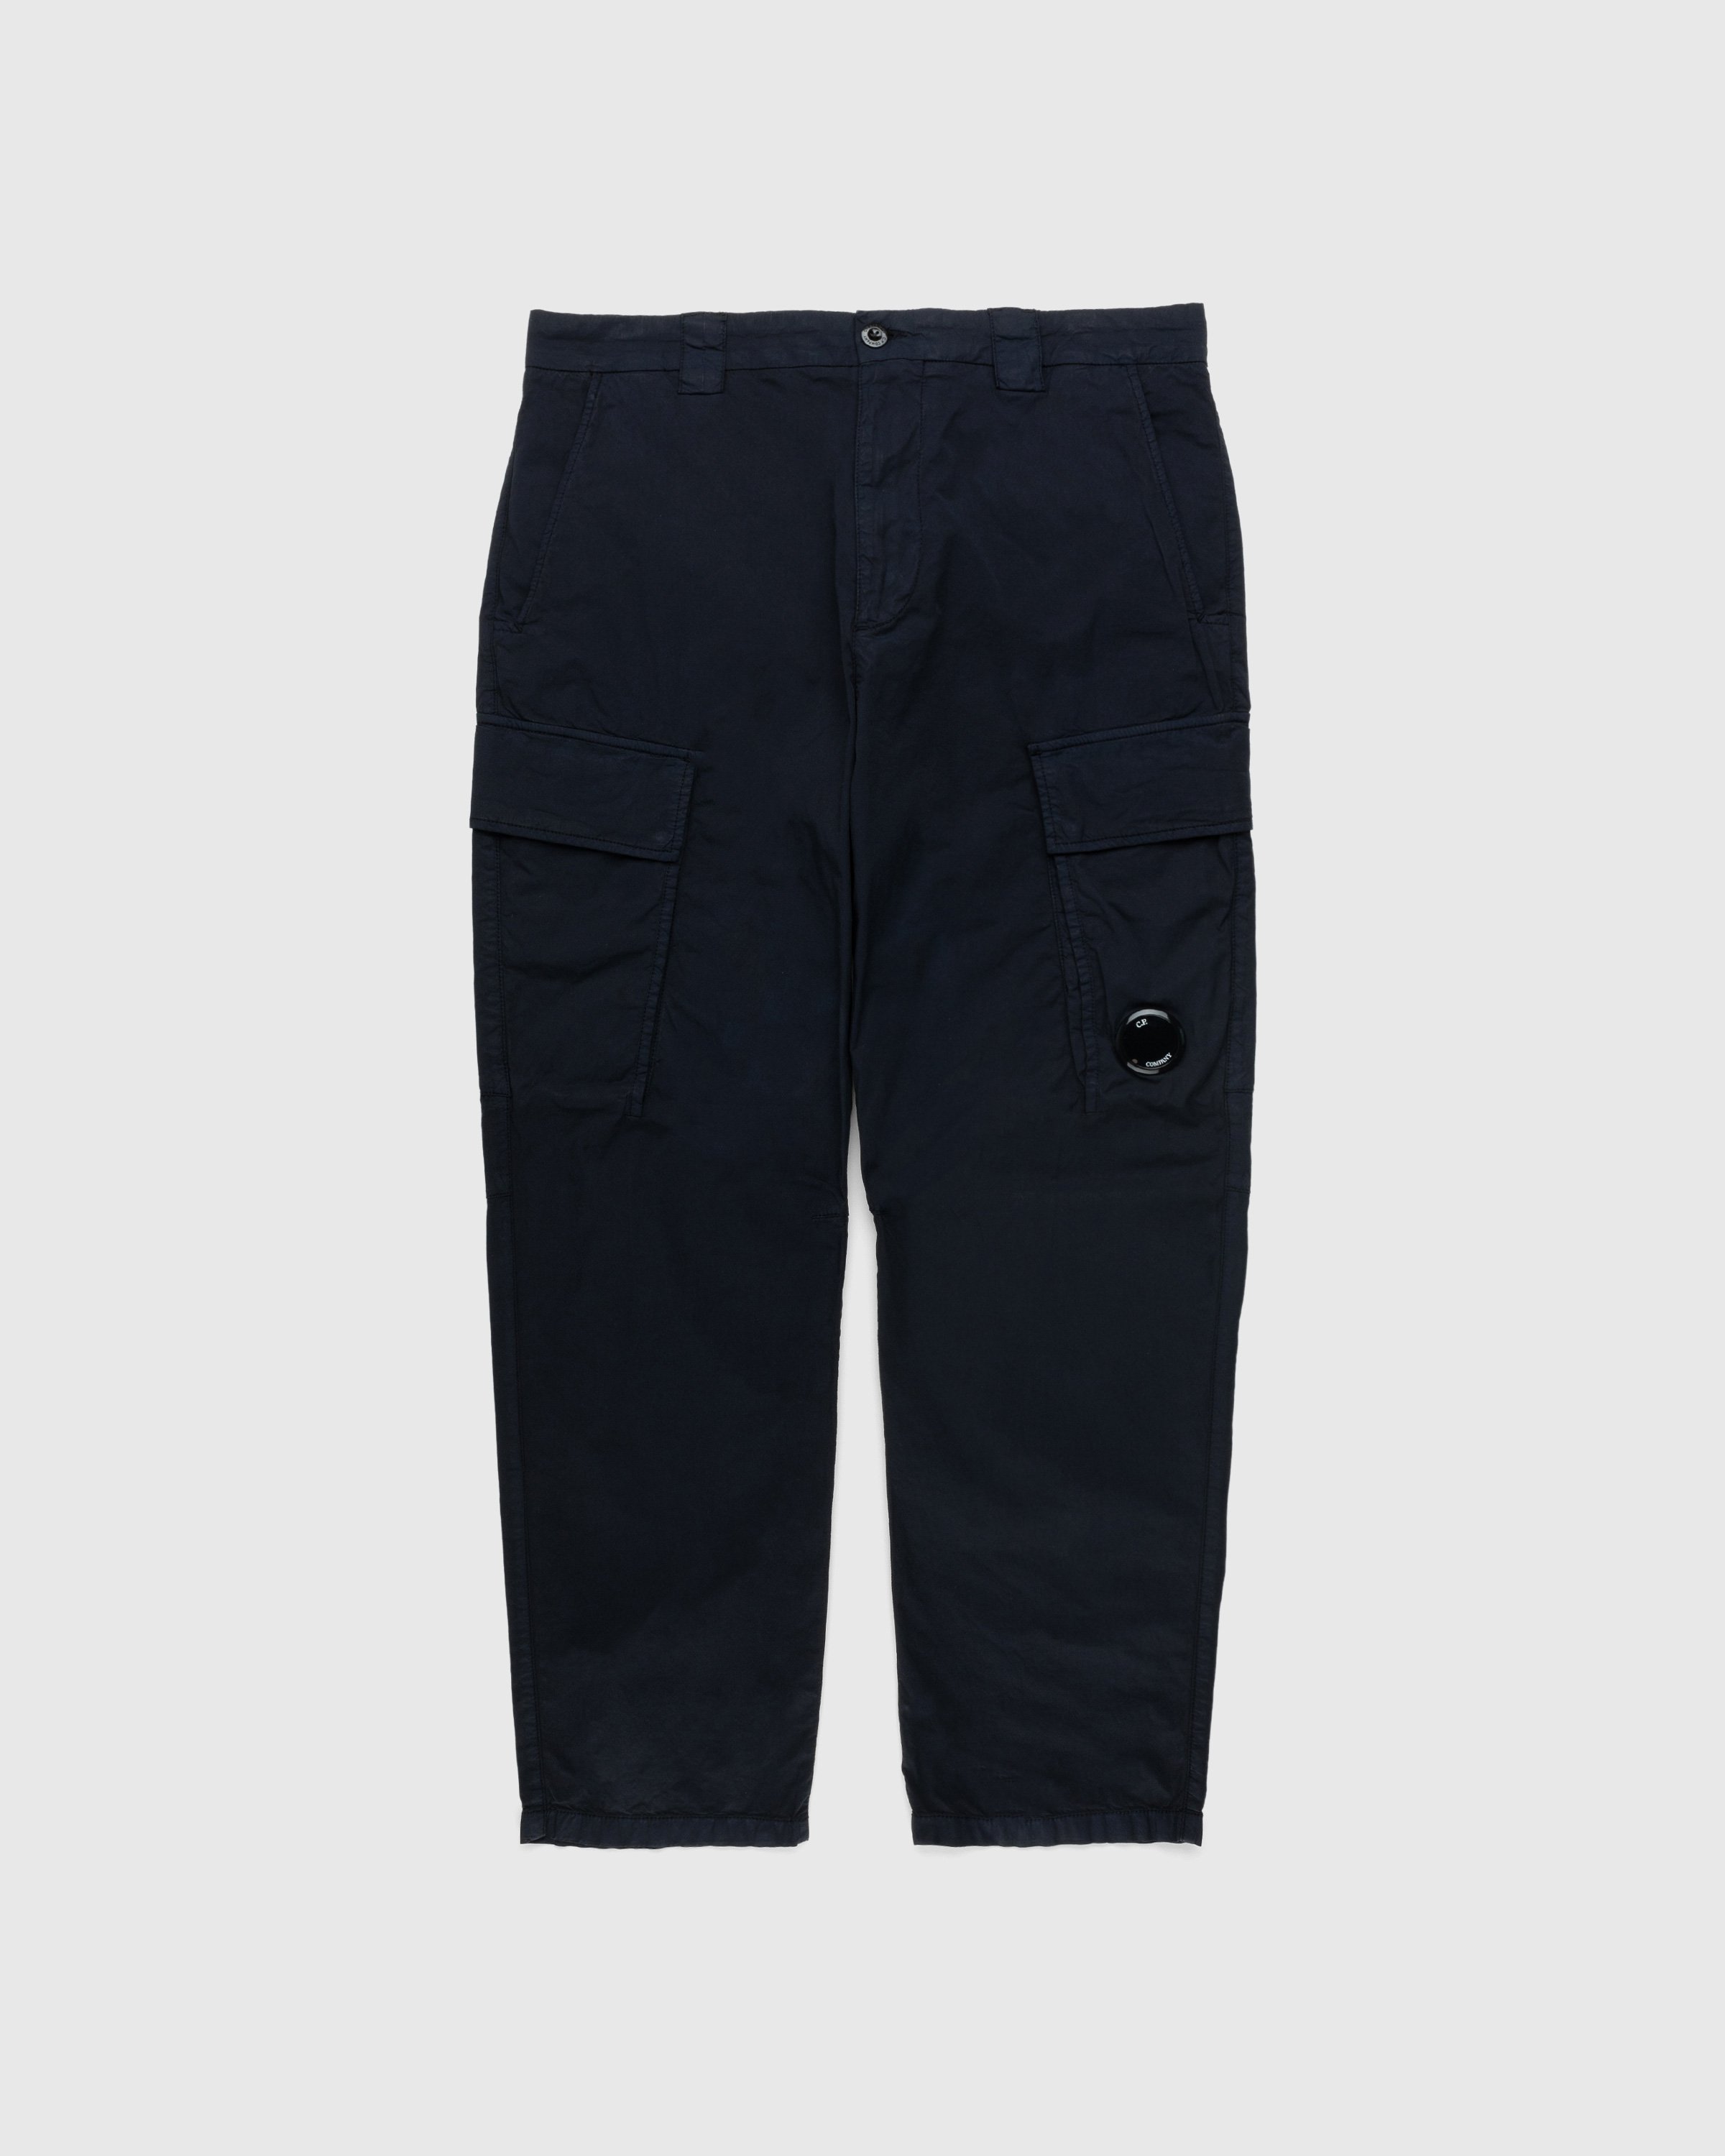 C.P. Company - Twill Stretch Cargo Pants Total Eclipse Blue - Clothing - Blue - Image 1